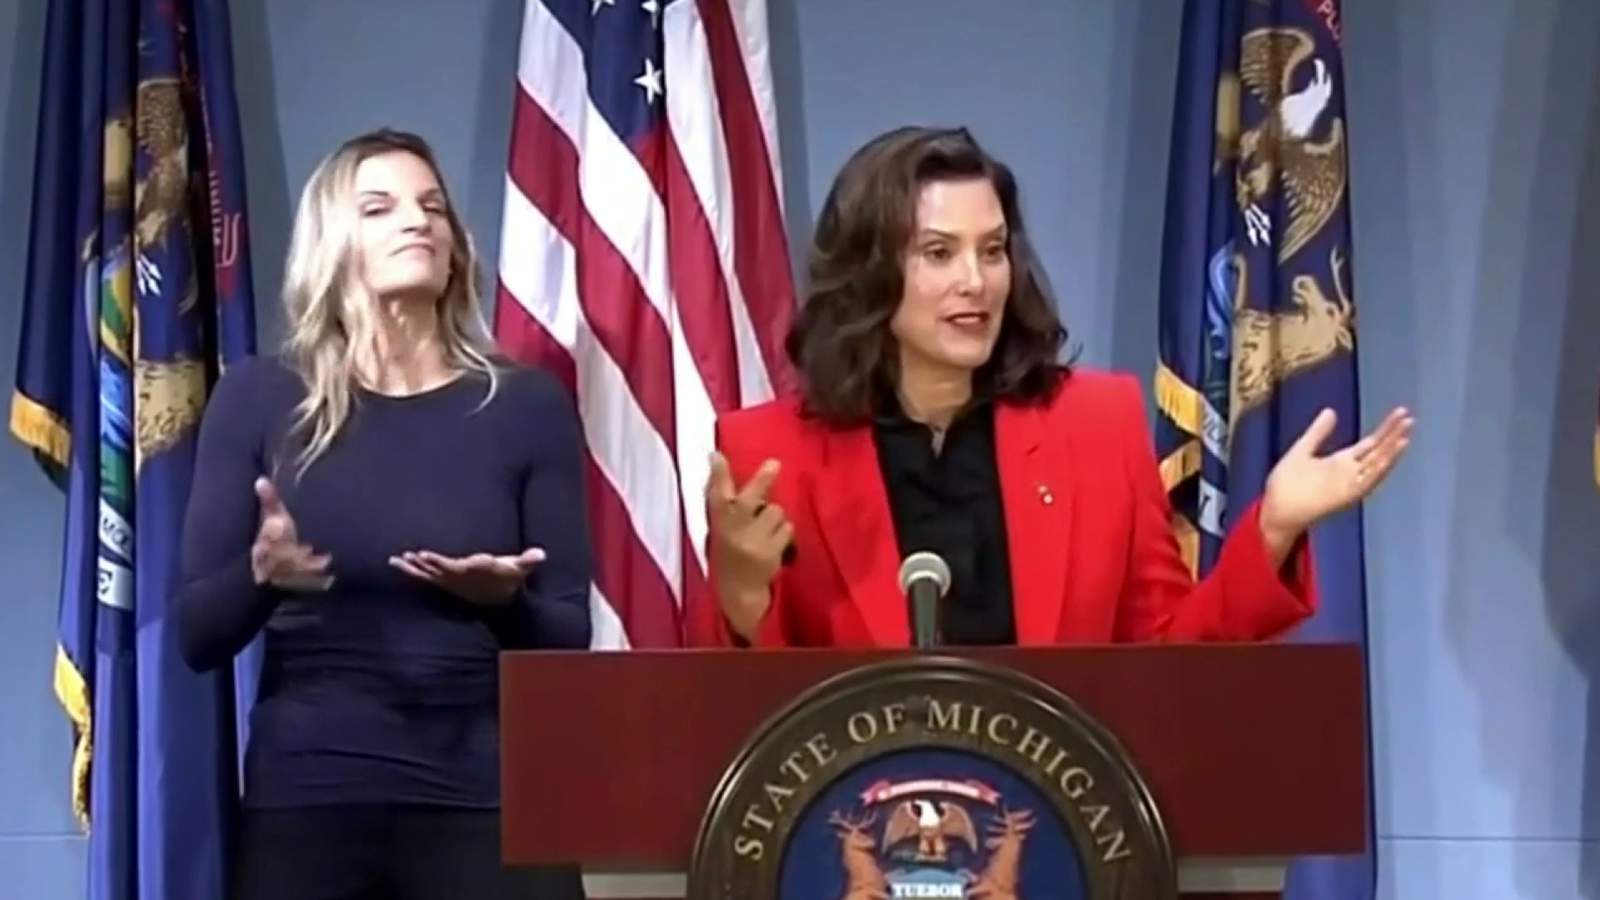 Michigan Gov. Whitmer reminds residents to wear masks in public to help stop spread of COVID-19